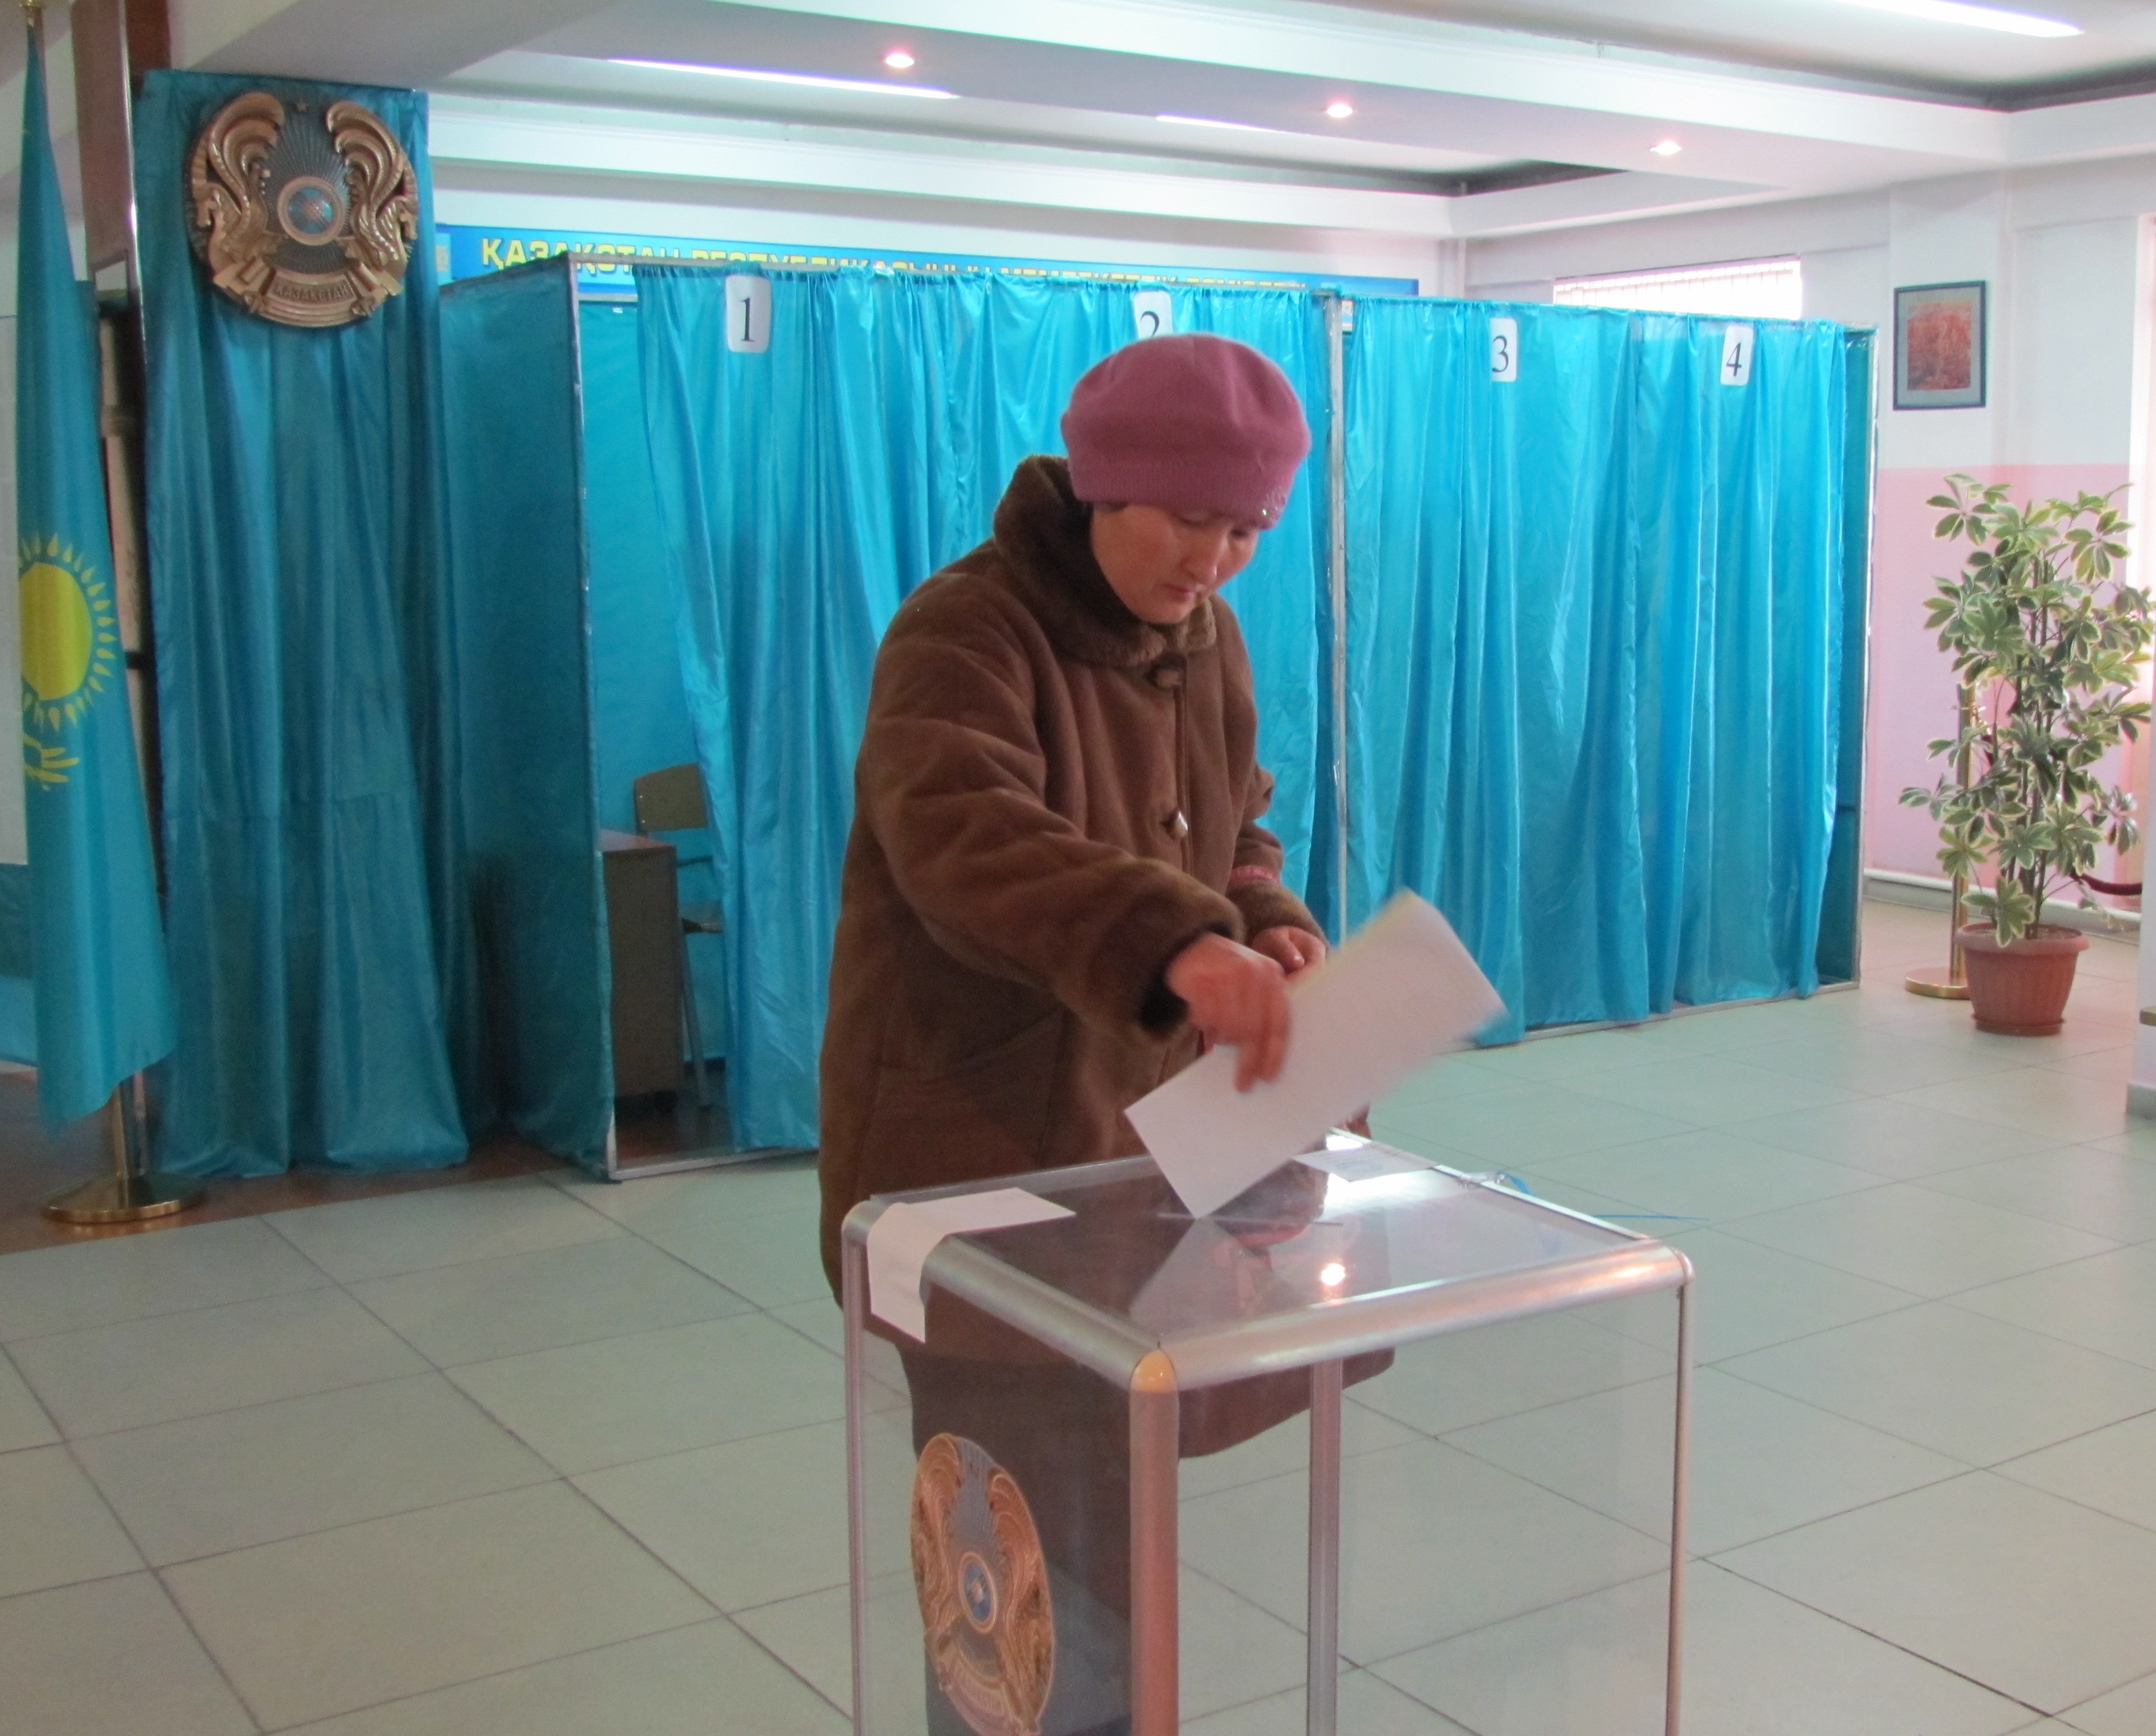 A woman voting in the 2012 Kazakhstan election.